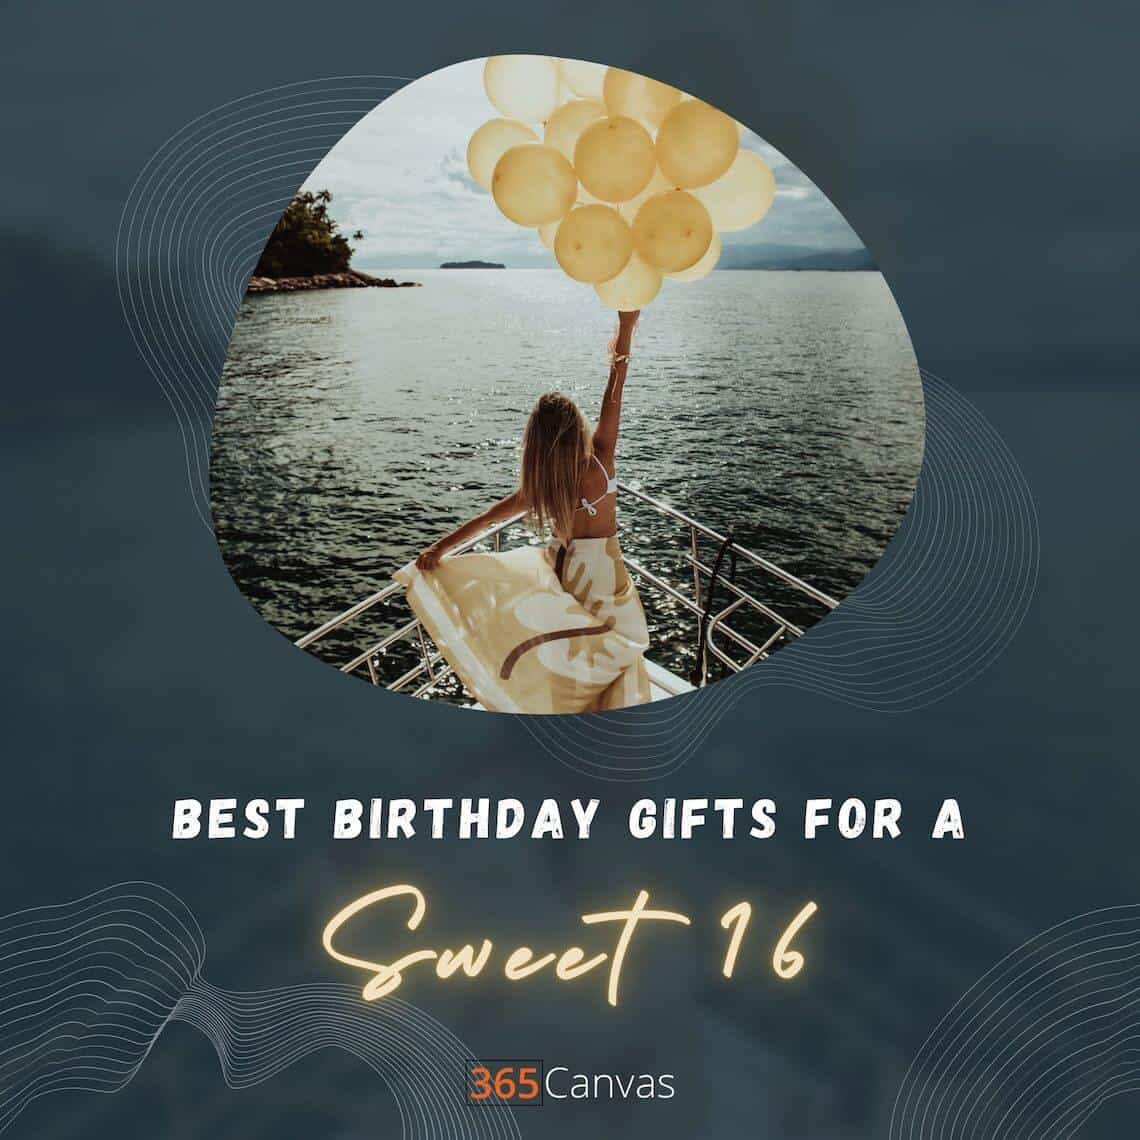 Sweet 16 Gifts: 32 Gift Ideas For A Glam 16th Birthday